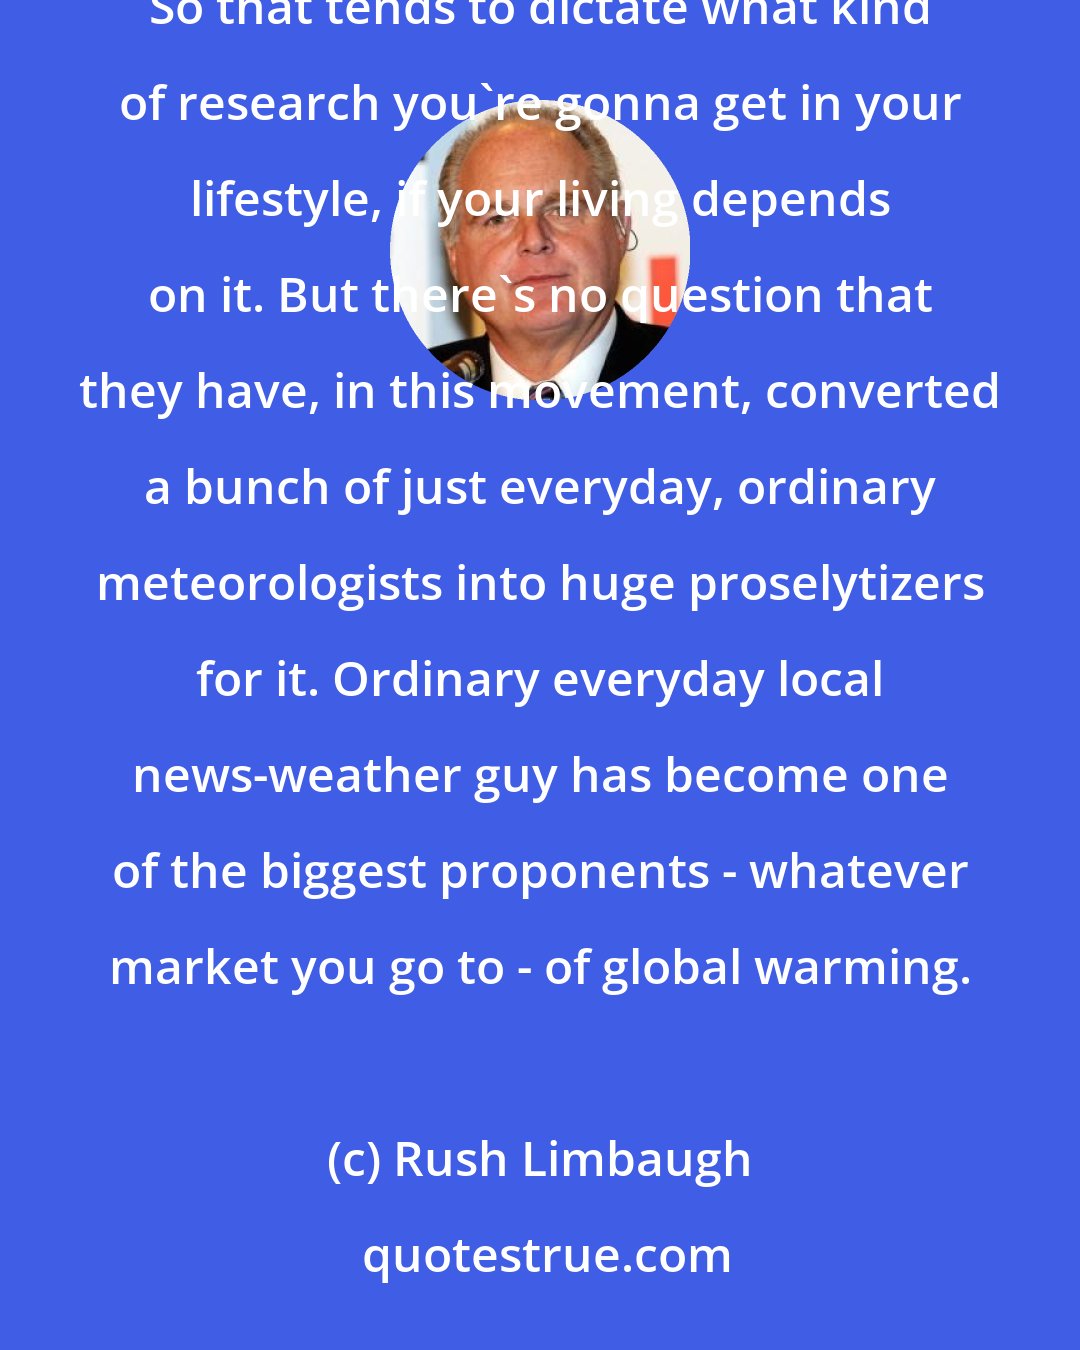 Rush Limbaugh: The political movement funds these people with donations if they produce the right outcome in their research. So that tends to dictate what kind of research you're gonna get in your lifestyle, if your living depends on it. But there's no question that they have, in this movement, converted a bunch of just everyday, ordinary meteorologists into huge proselytizers for it. Ordinary everyday local news-weather guy has become one of the biggest proponents - whatever market you go to - of global warming.